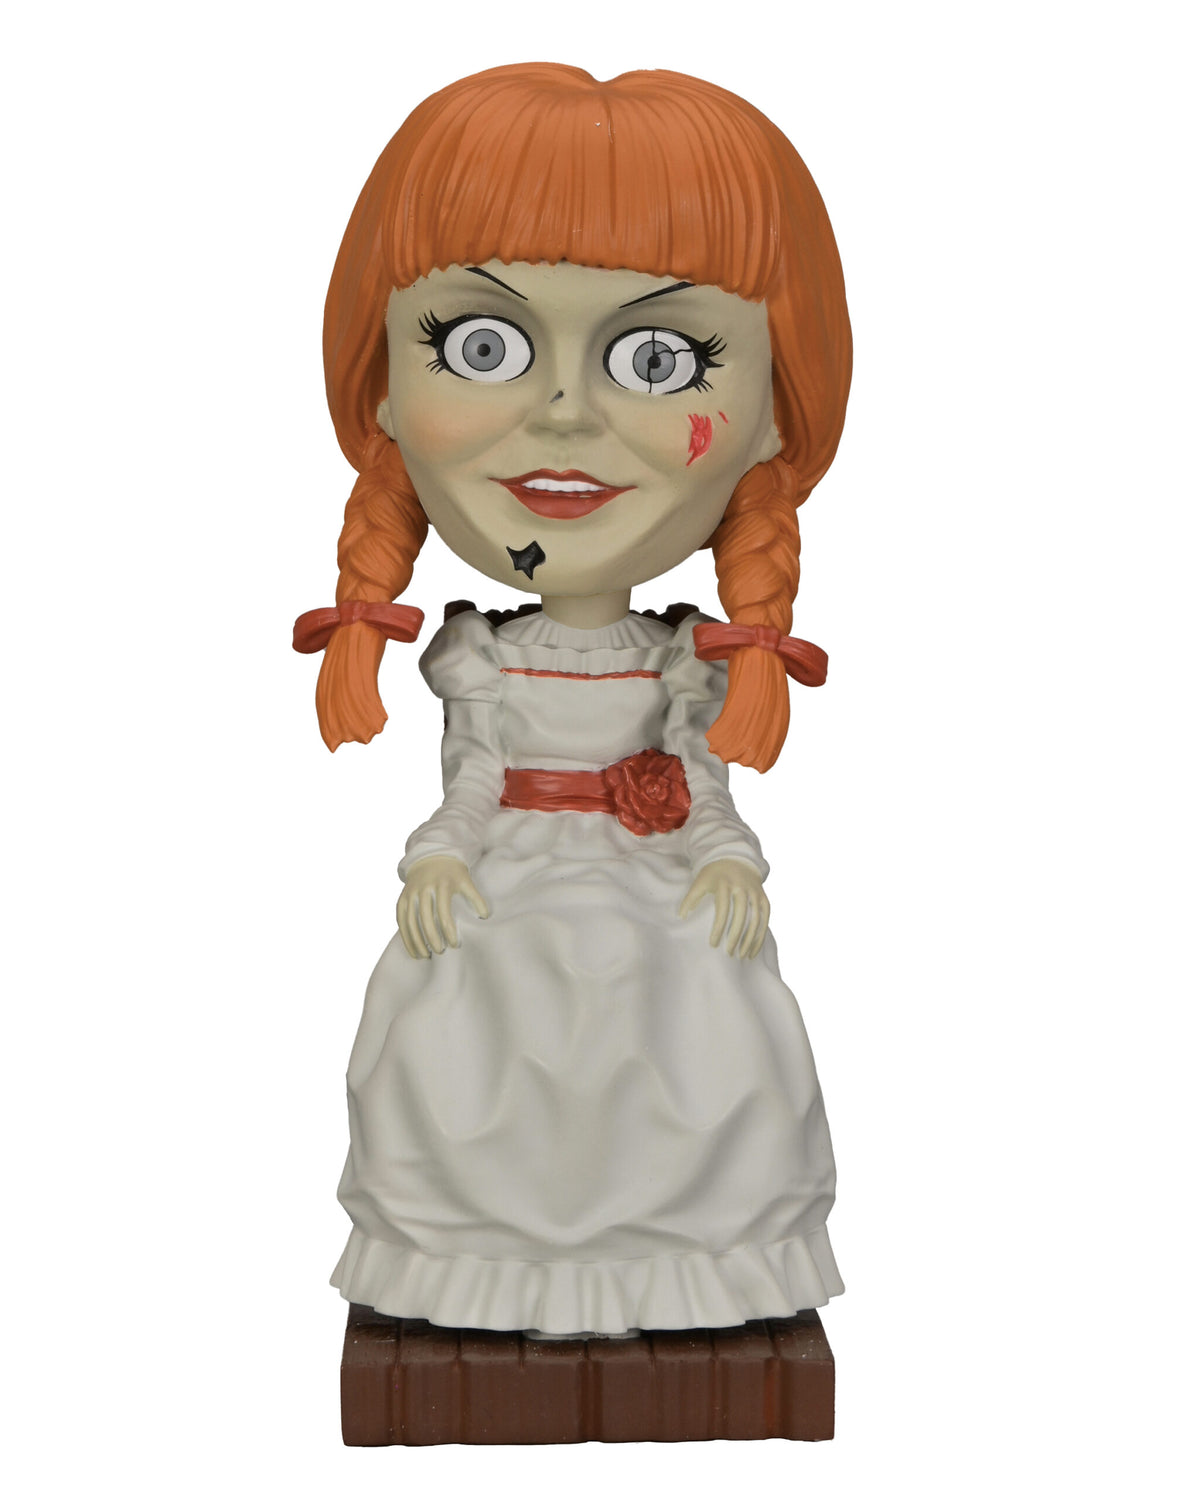 The Conjuring Universe: 7" Annabelle Resin Head Knocker